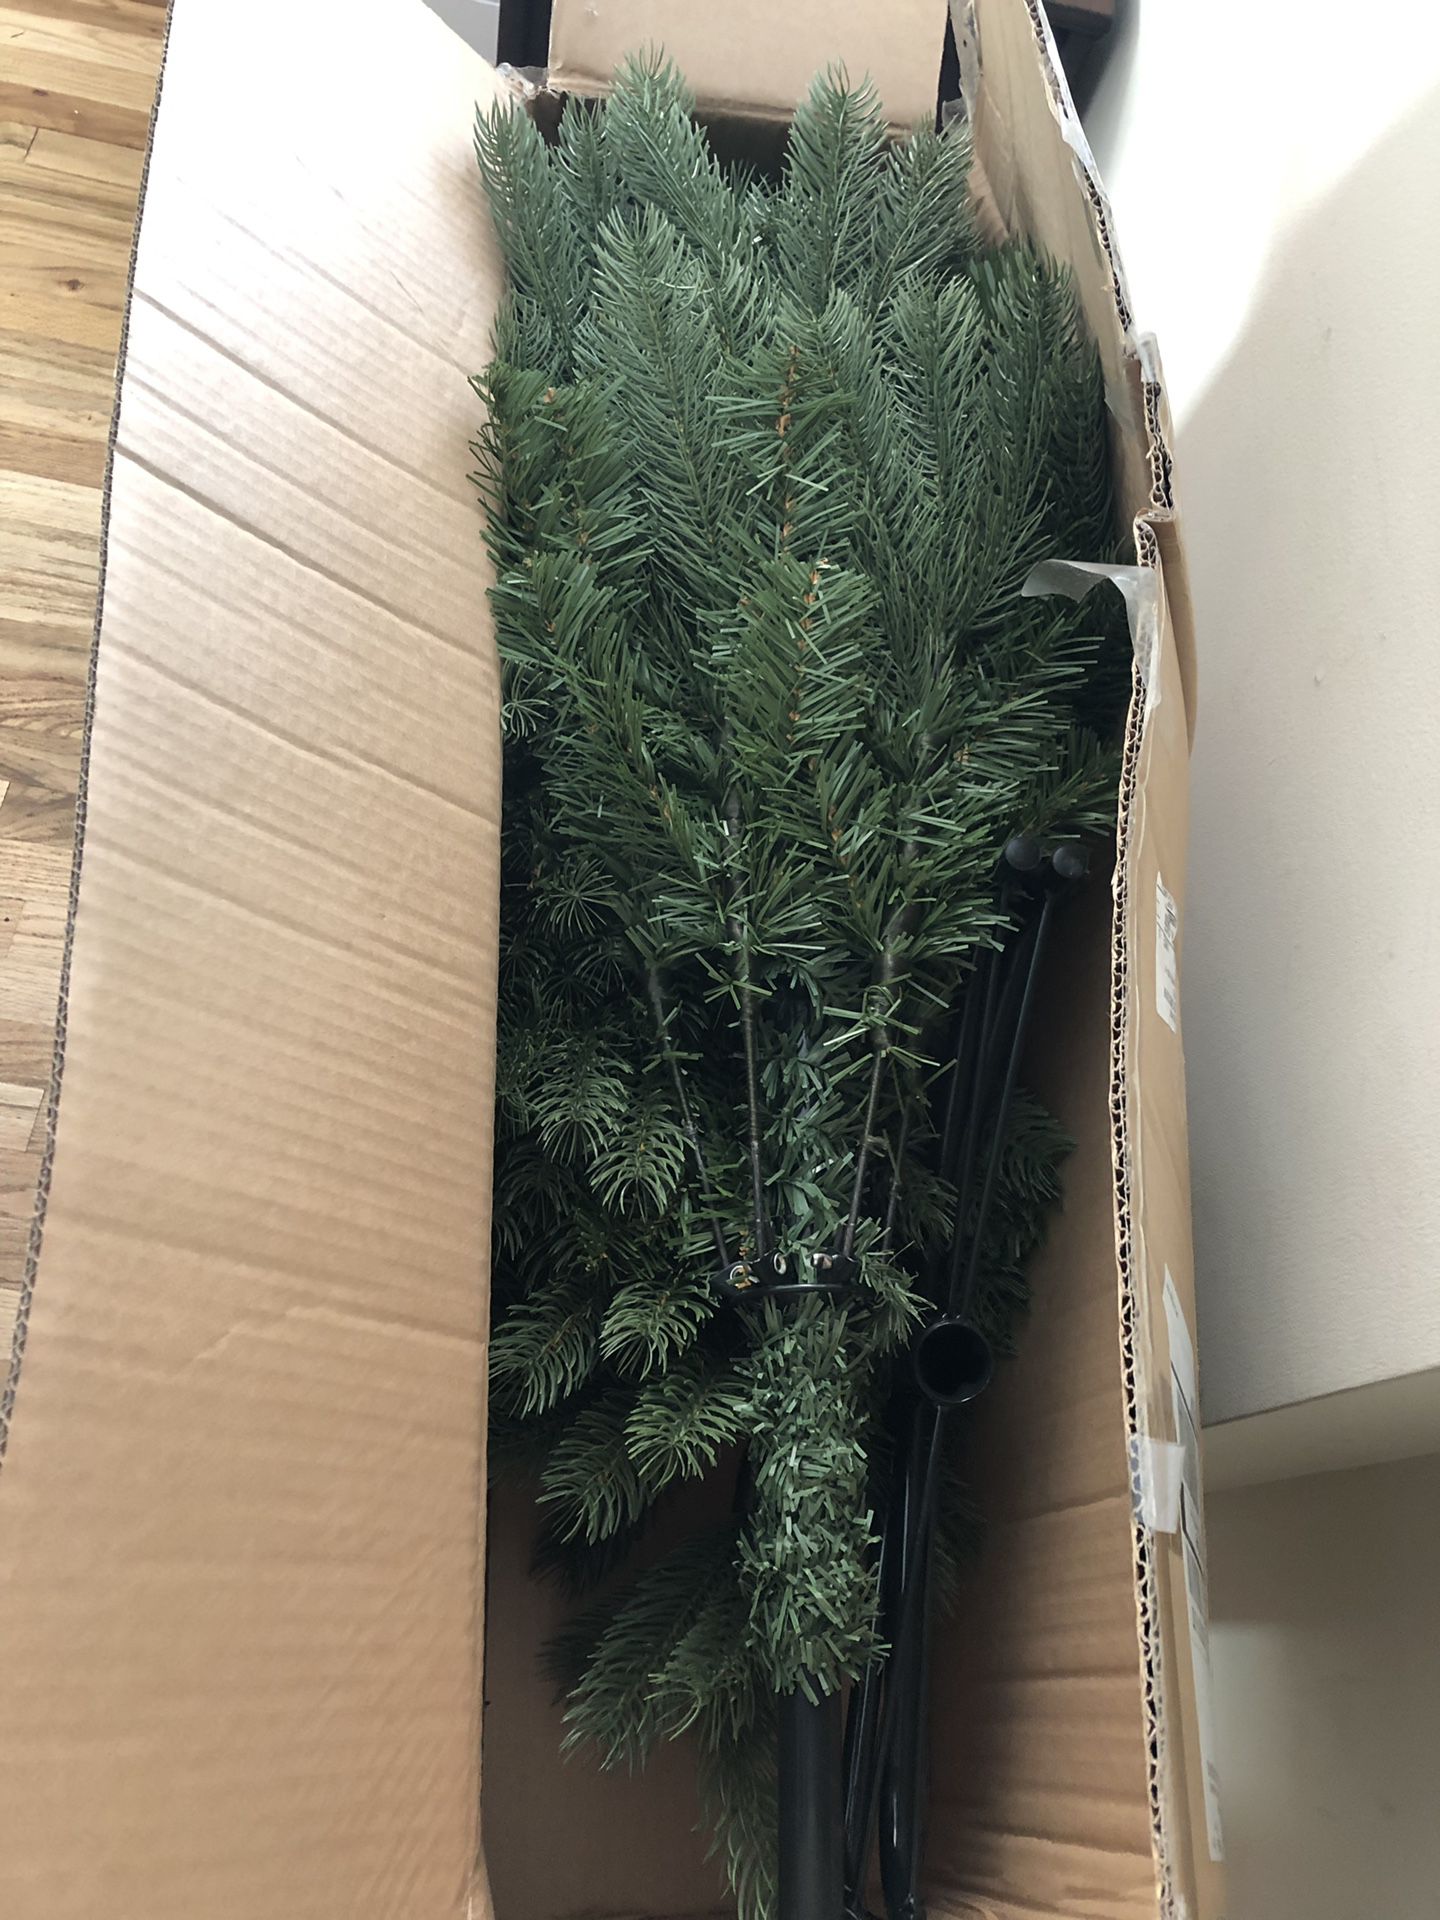 Artificial Christmas tree 4 feet tall, stand included